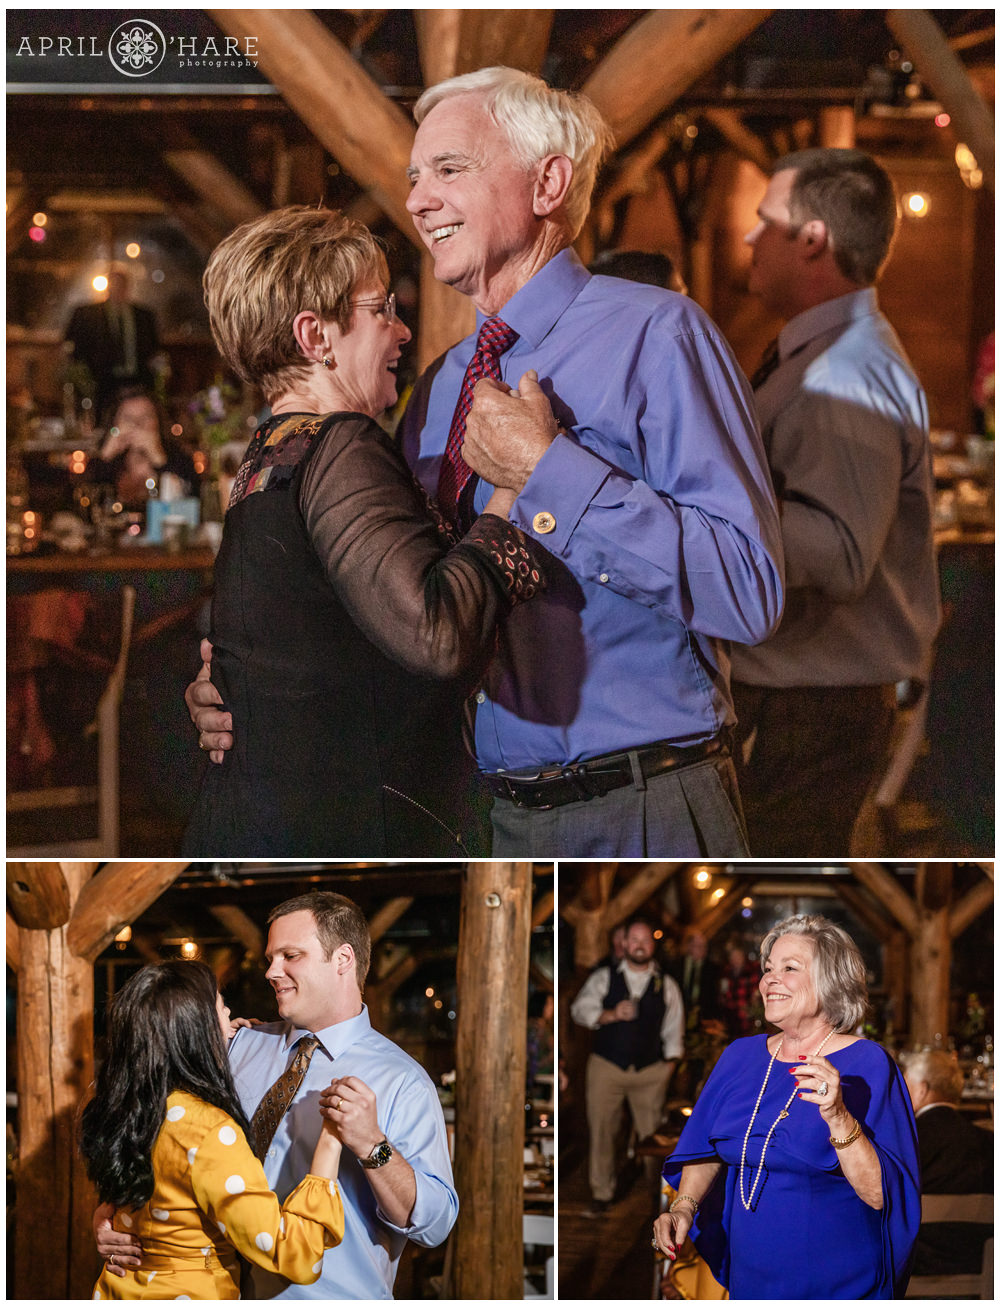 Photo collage of wedding guests dancing and enjoying themselves inside a wood cabin in Vail